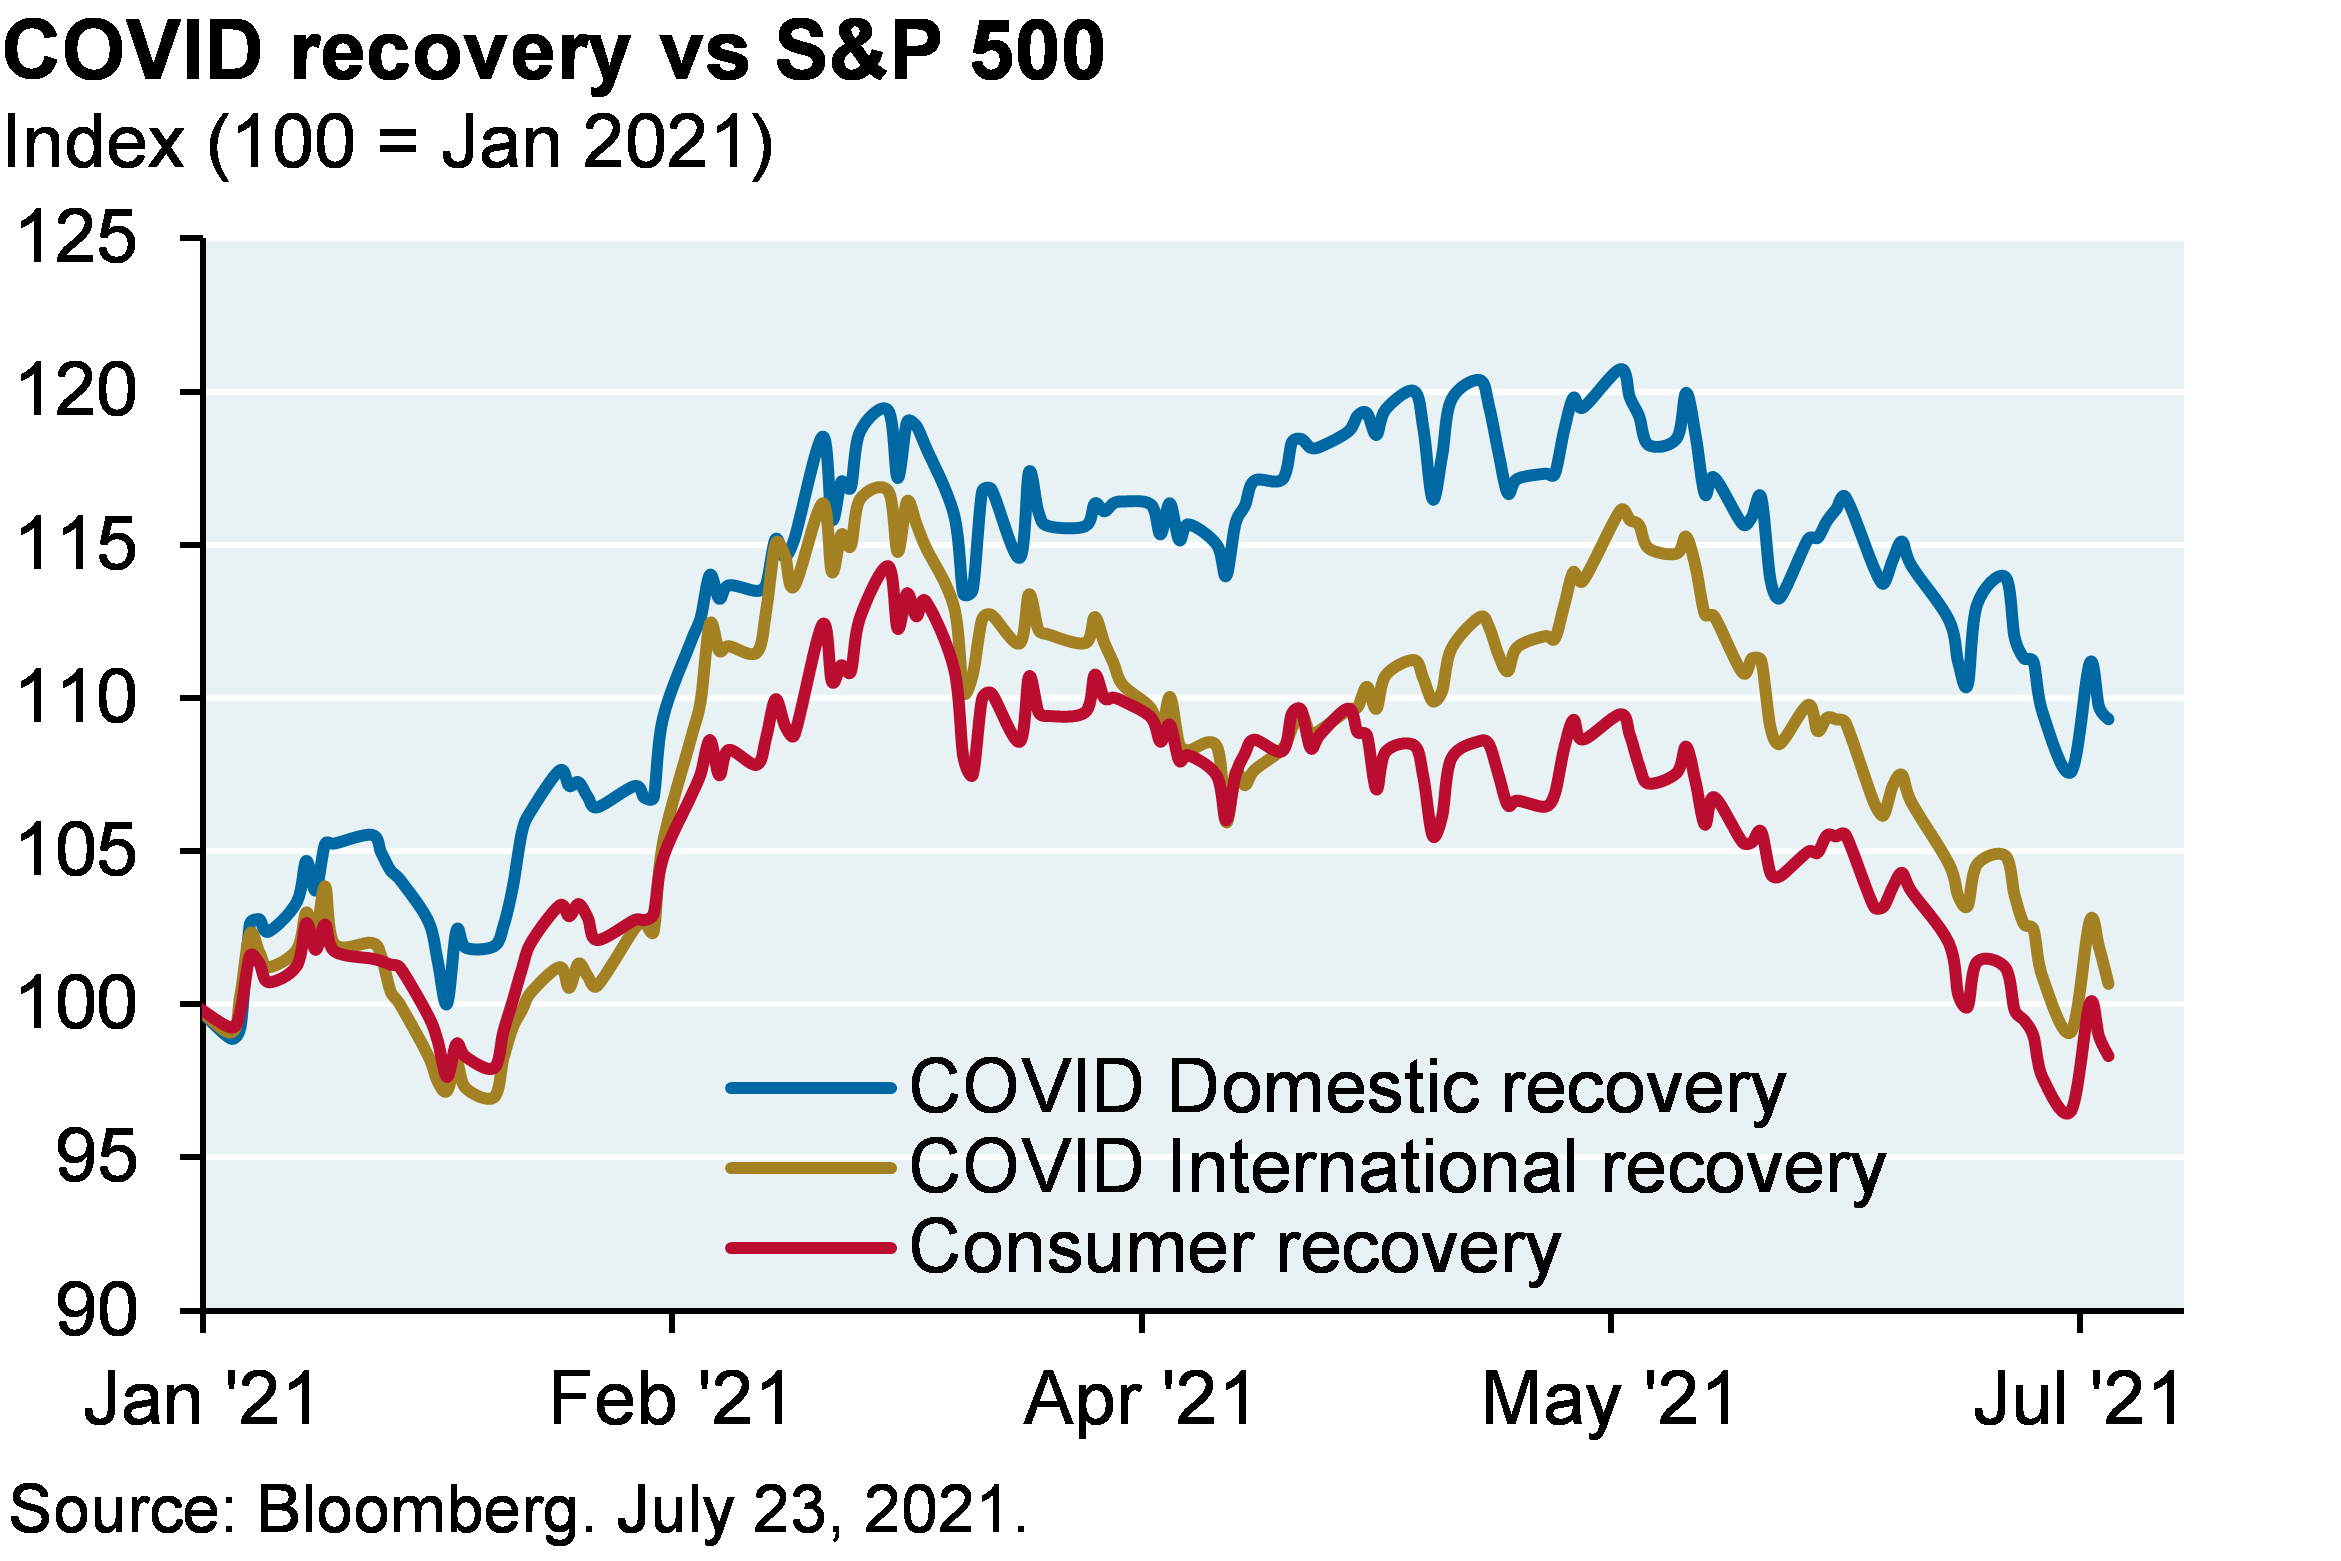 Line chart shows the COVID recovery vs S&P 500 shown as an index where 100 represents January 2021 levels. Chart shows the COVID domestic recovery is around 107, the COVID international recovery just under 100, and the consumer recovery is around 97. 